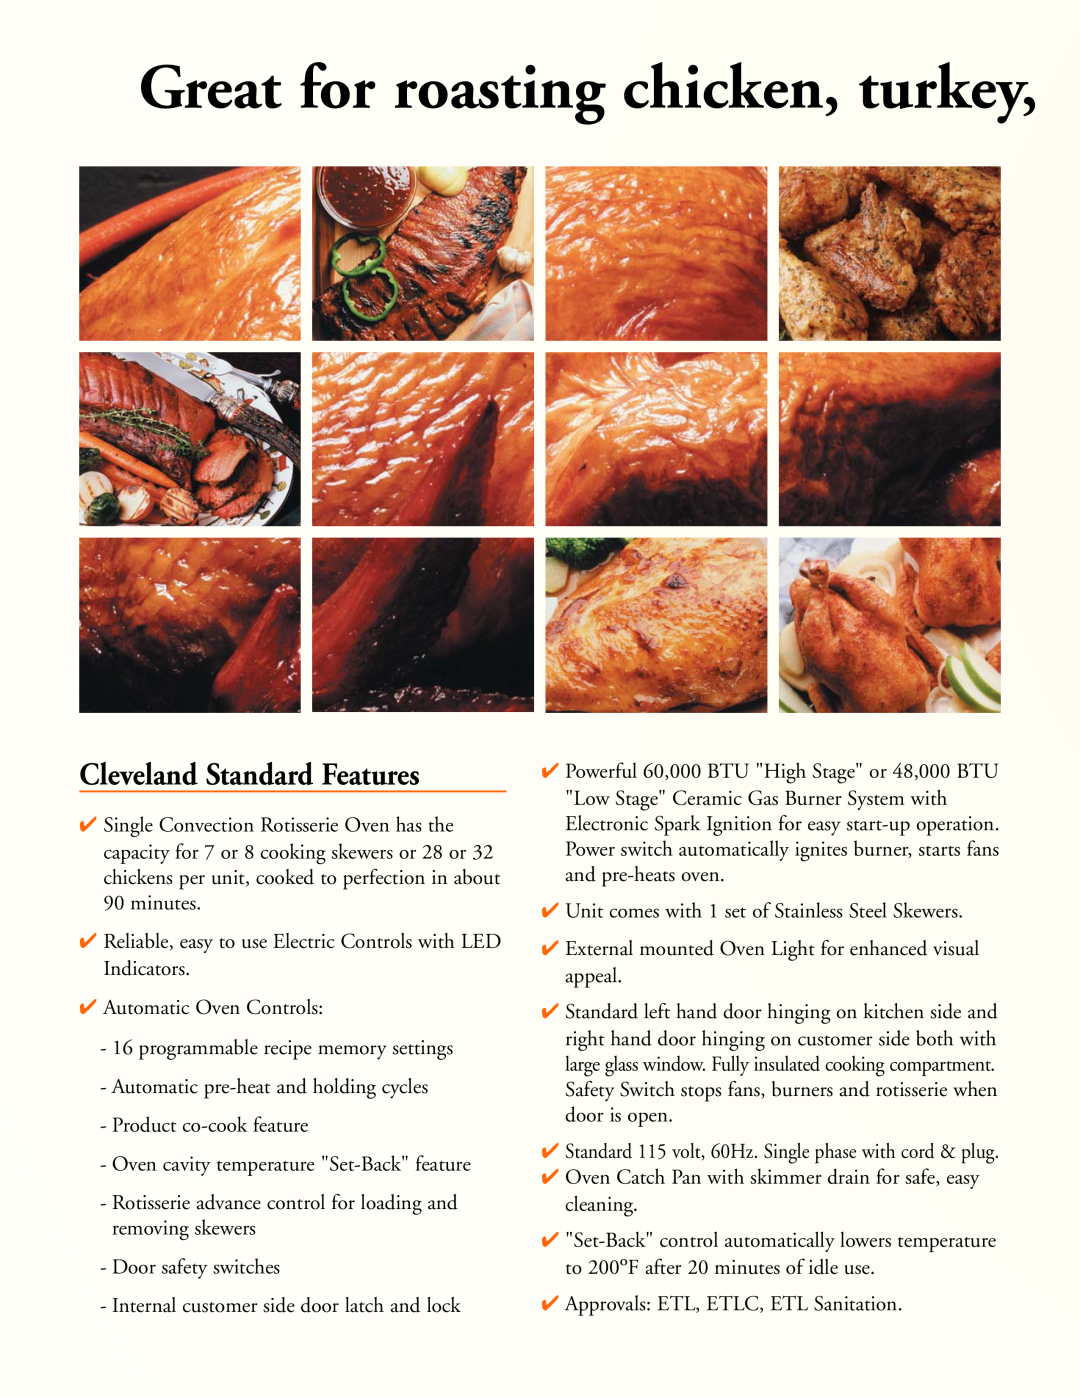 Cleveland Range CR-32 manual Cleveland Standard Features, Great for roasting chicken, turkey 